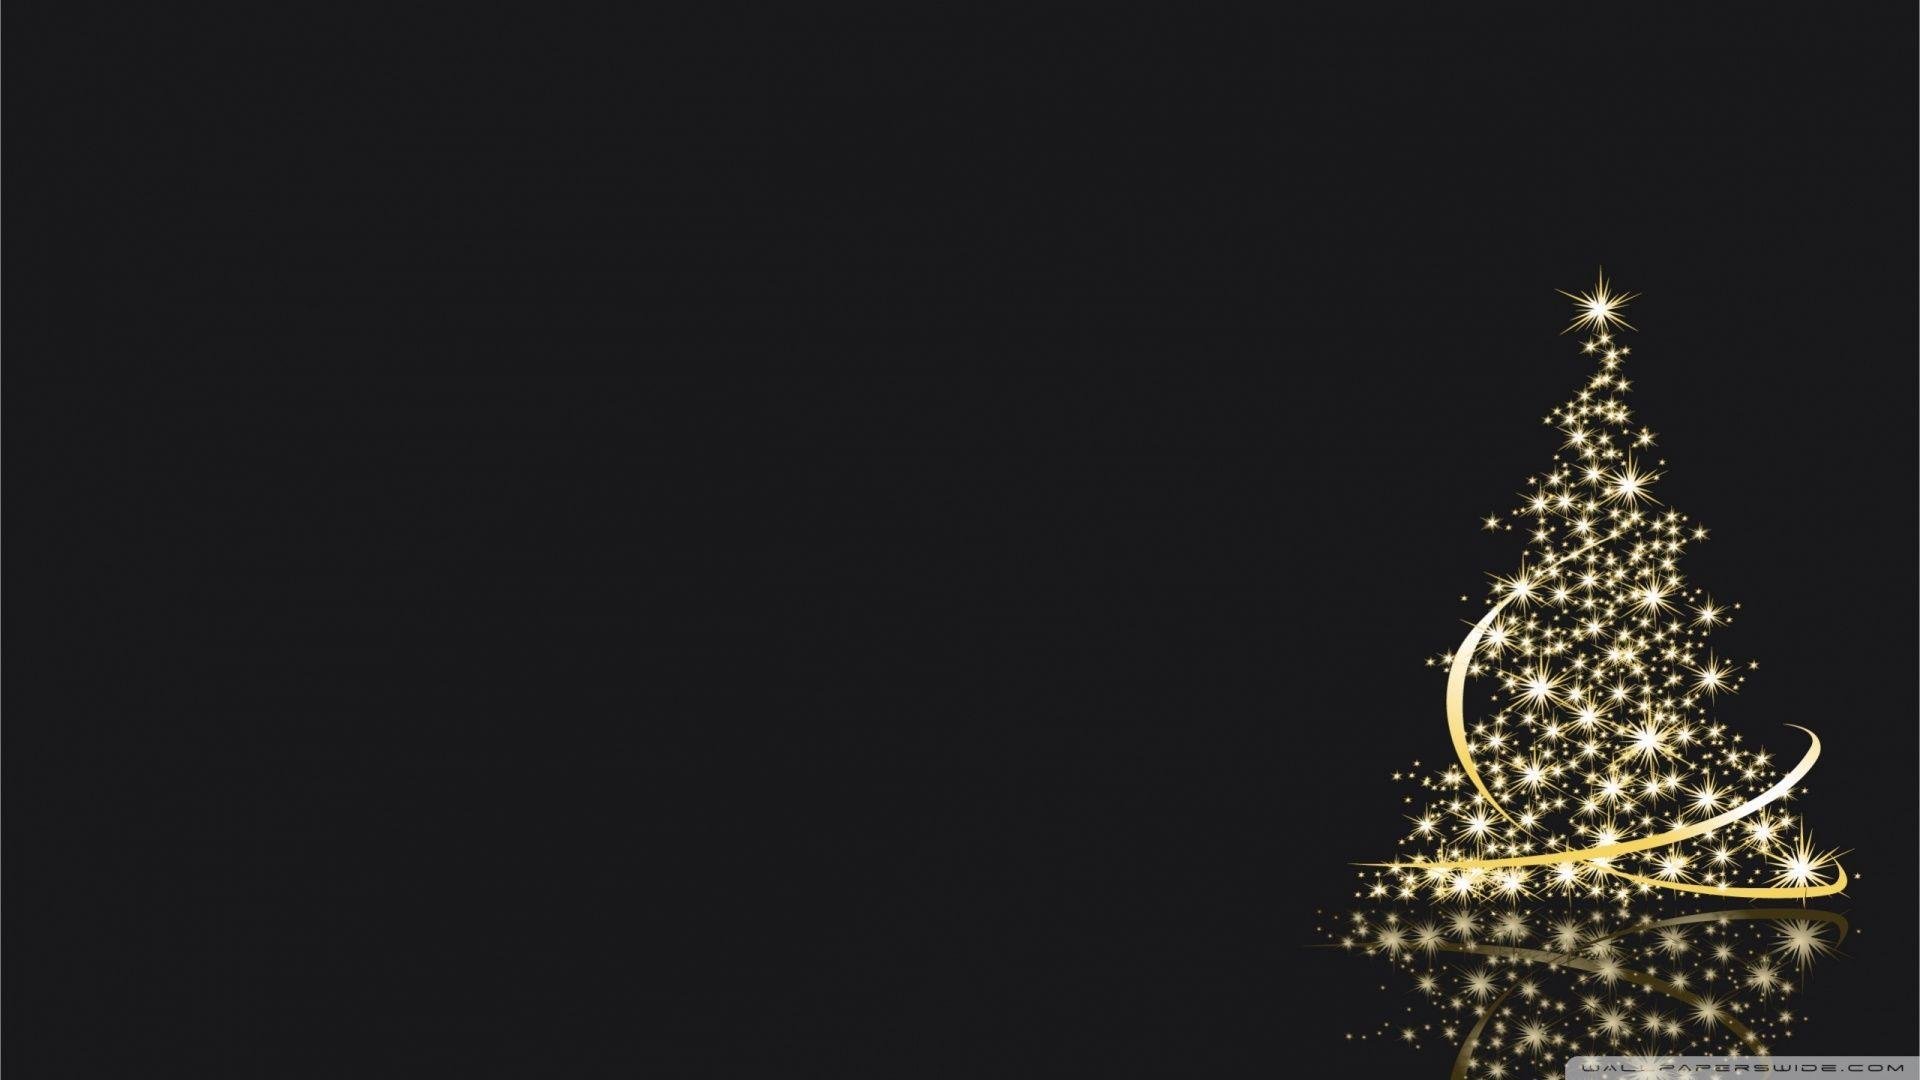 Abstract Christmas Tree Wallpapers 1920x1080 Abstract